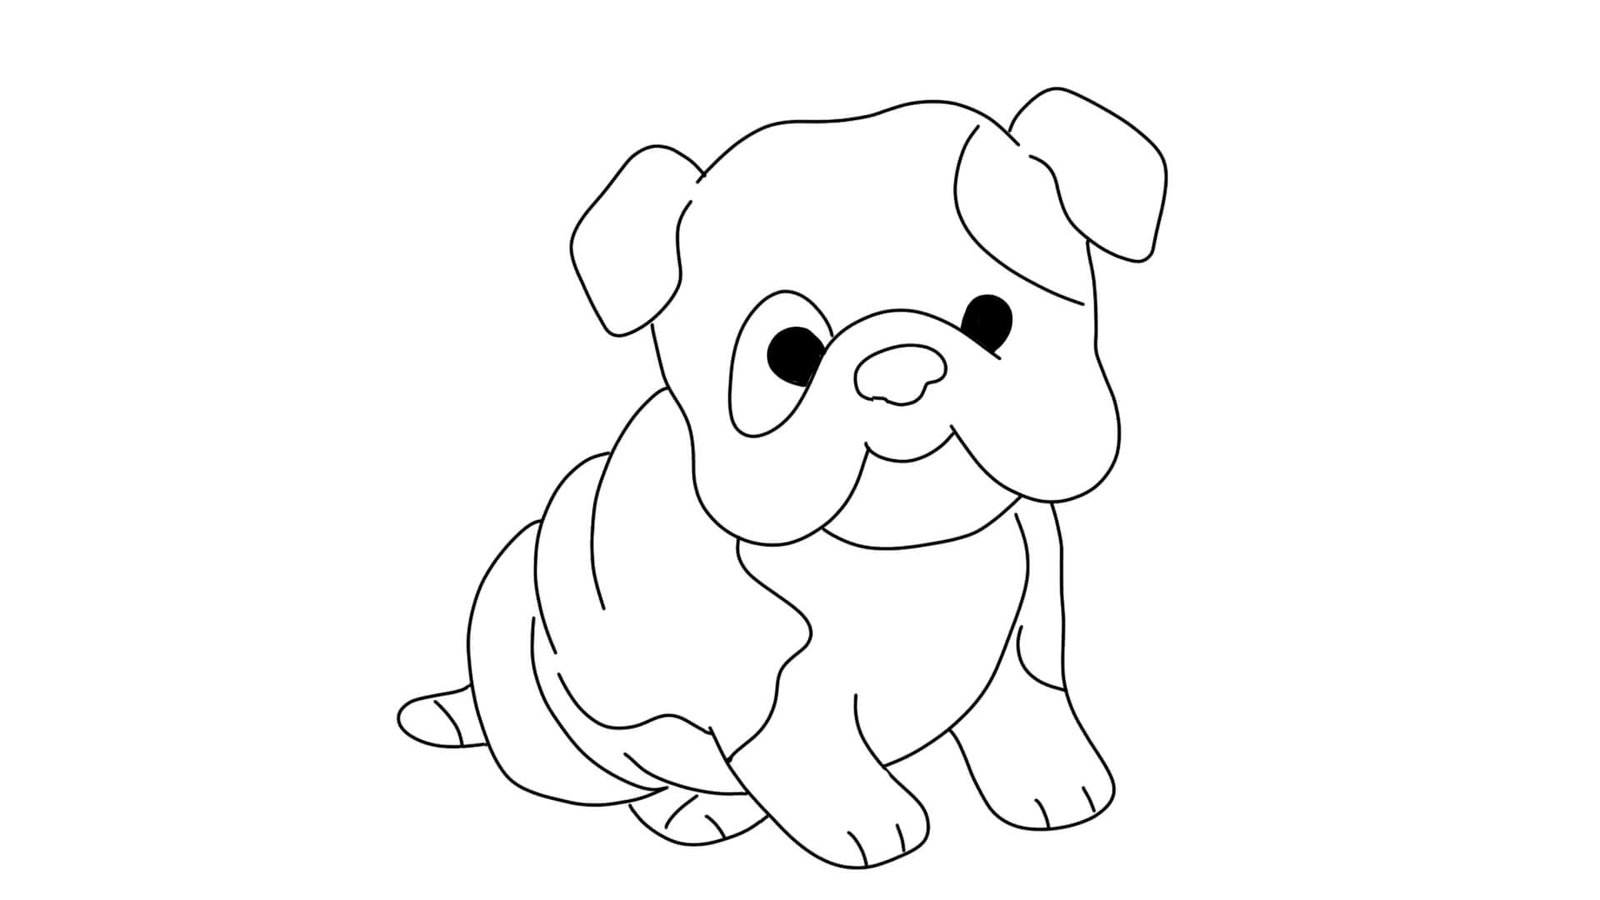 Puppy Bull Dog Coloring Page